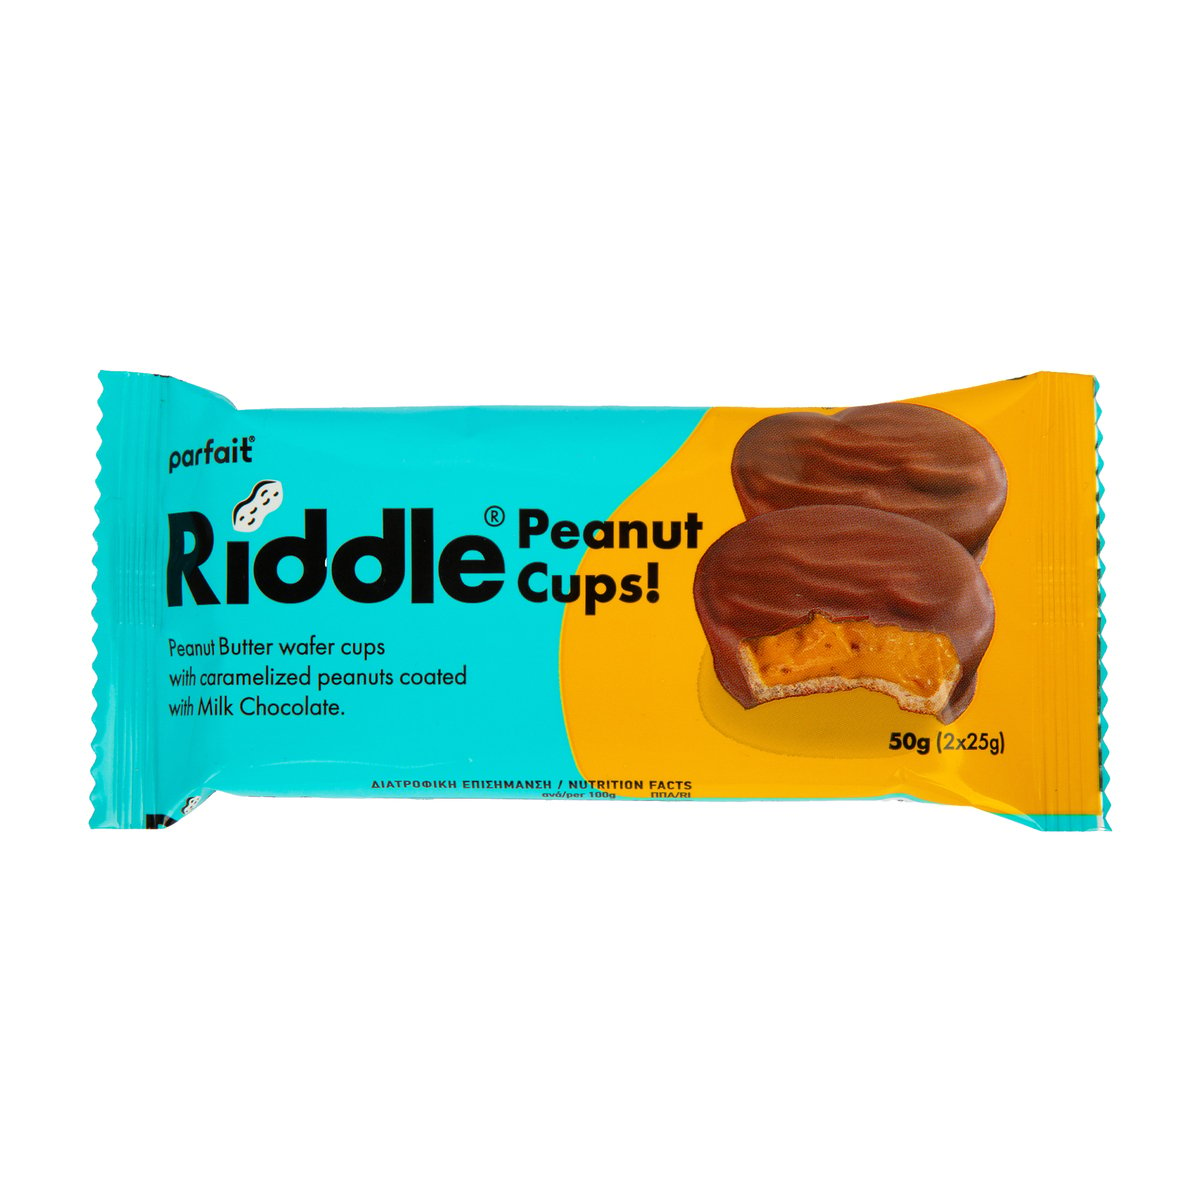 Riddle Peanut Butter Wafer Cups 50 g